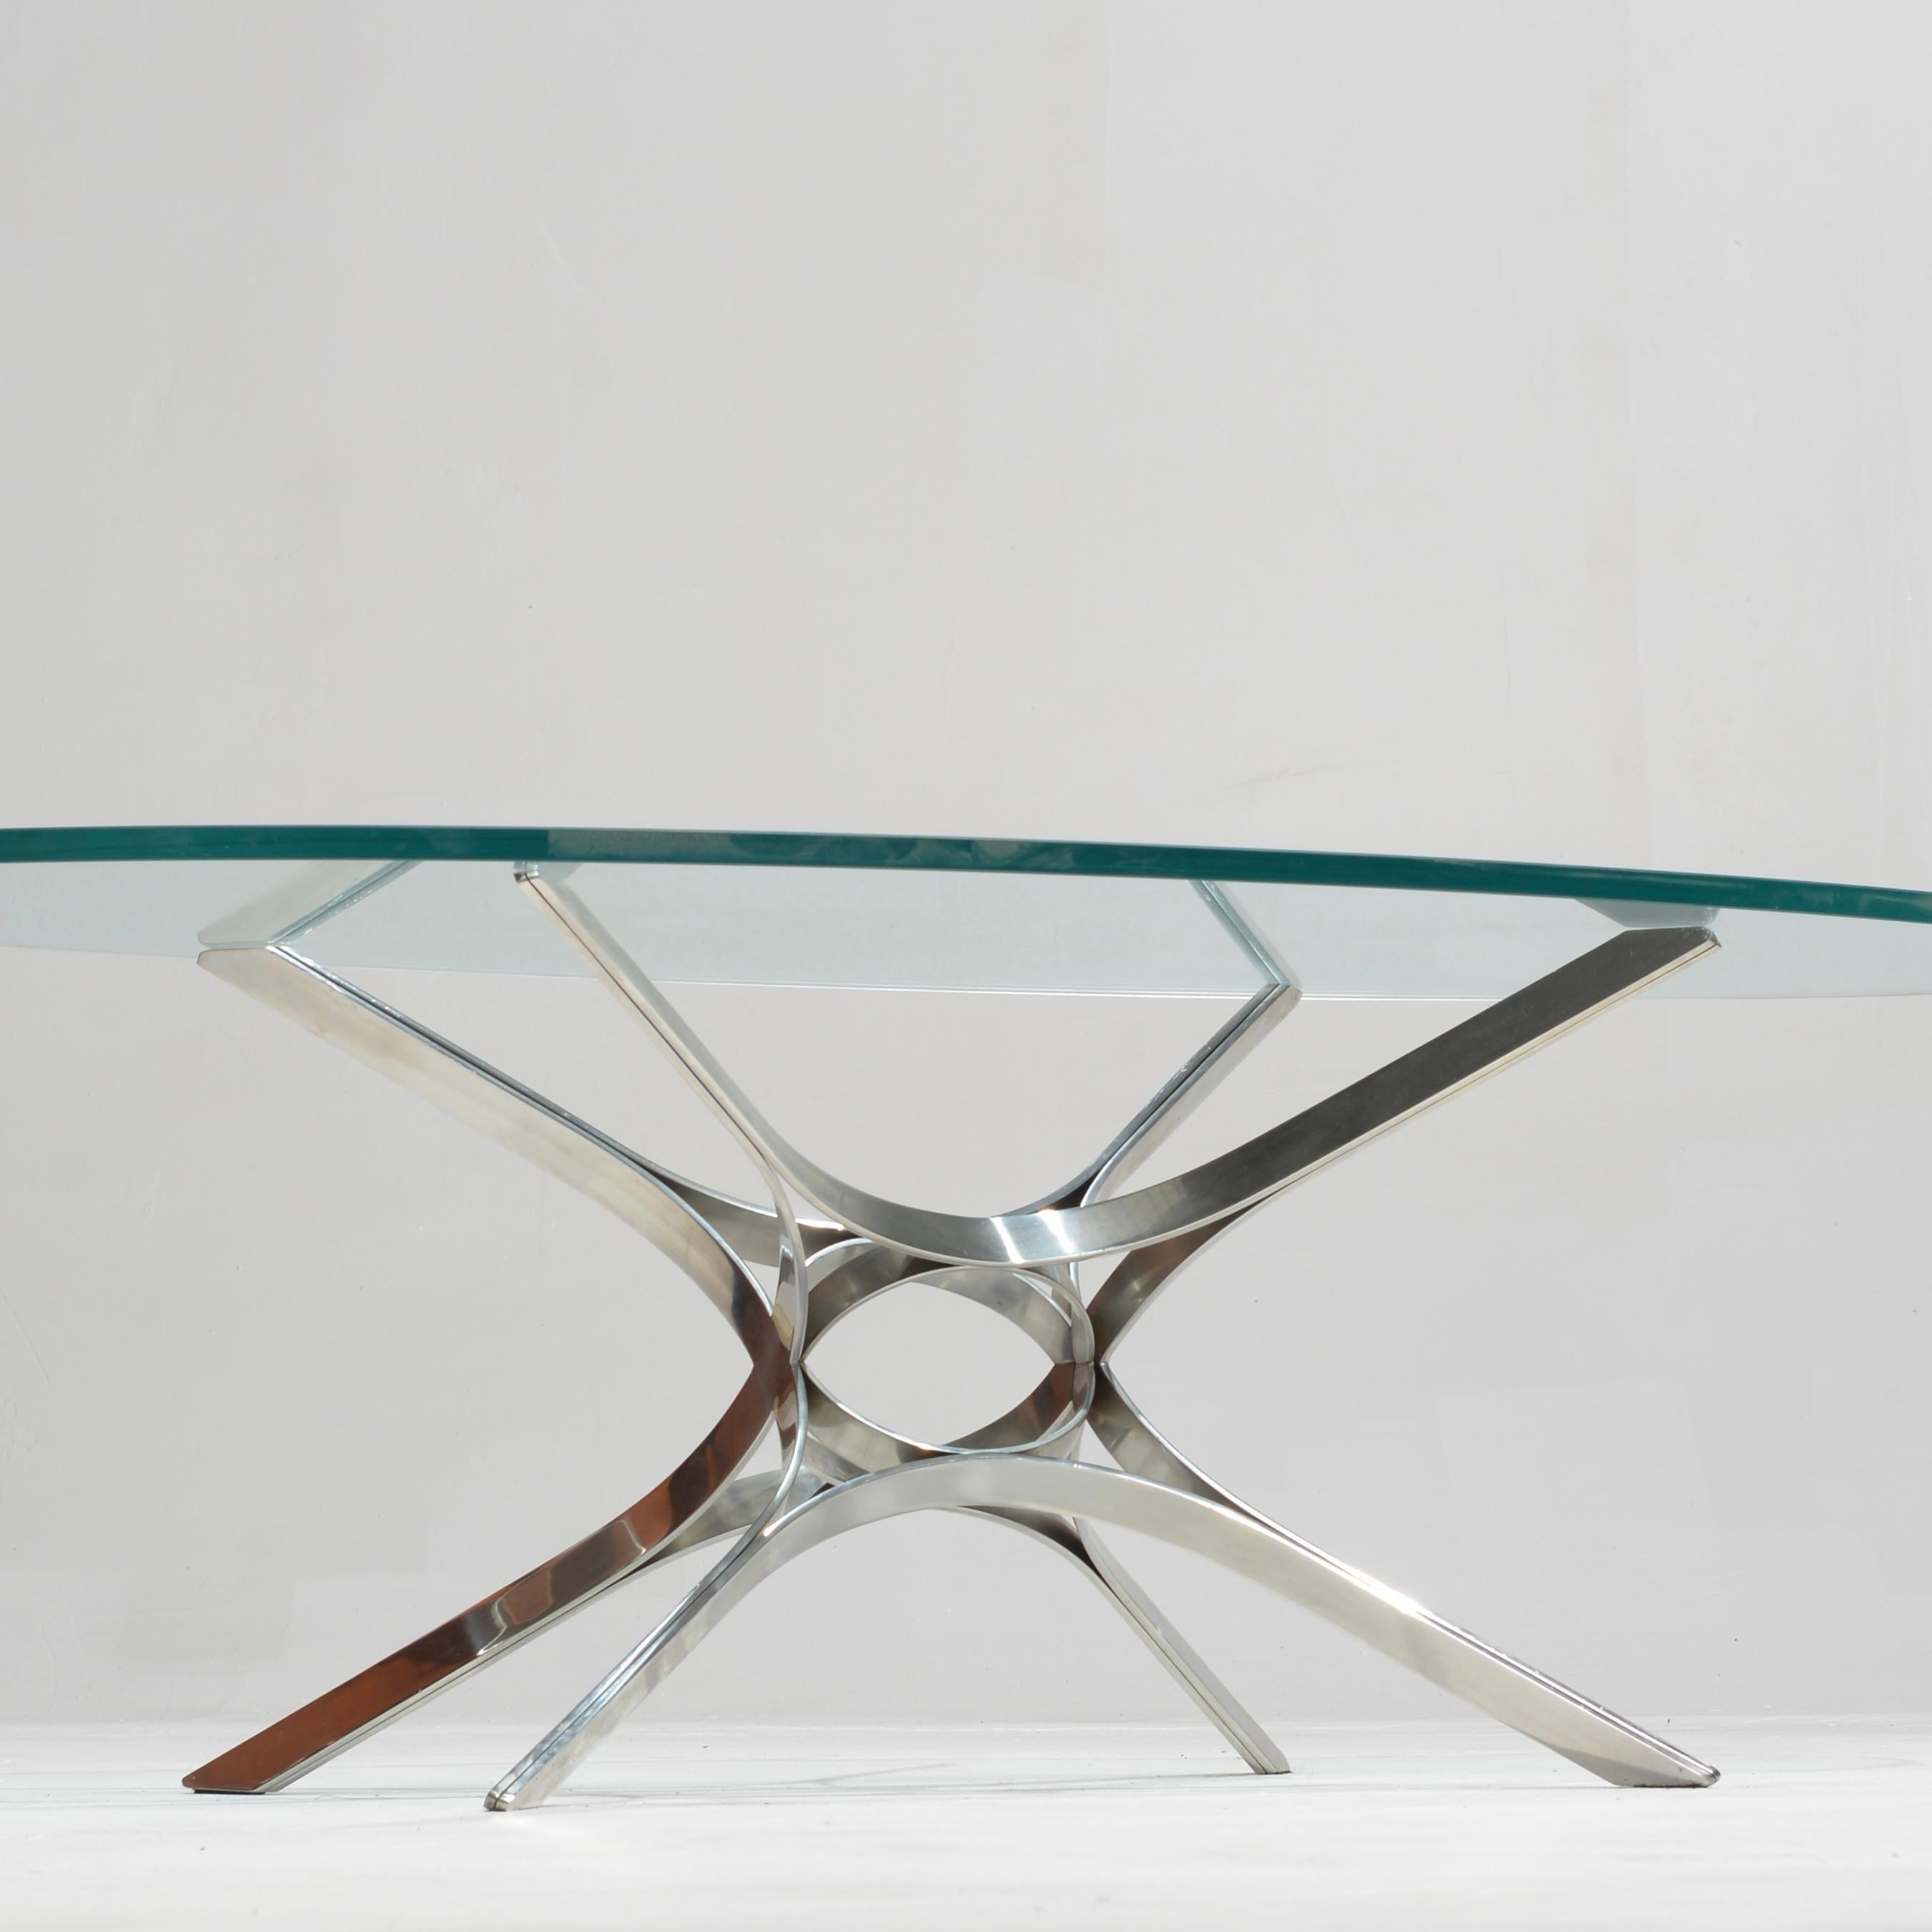 Sculptural Stainless Steel and Glass Coffee Table by Roger Sprunger for Dunbar In Good Condition For Sale In Los Angeles, CA